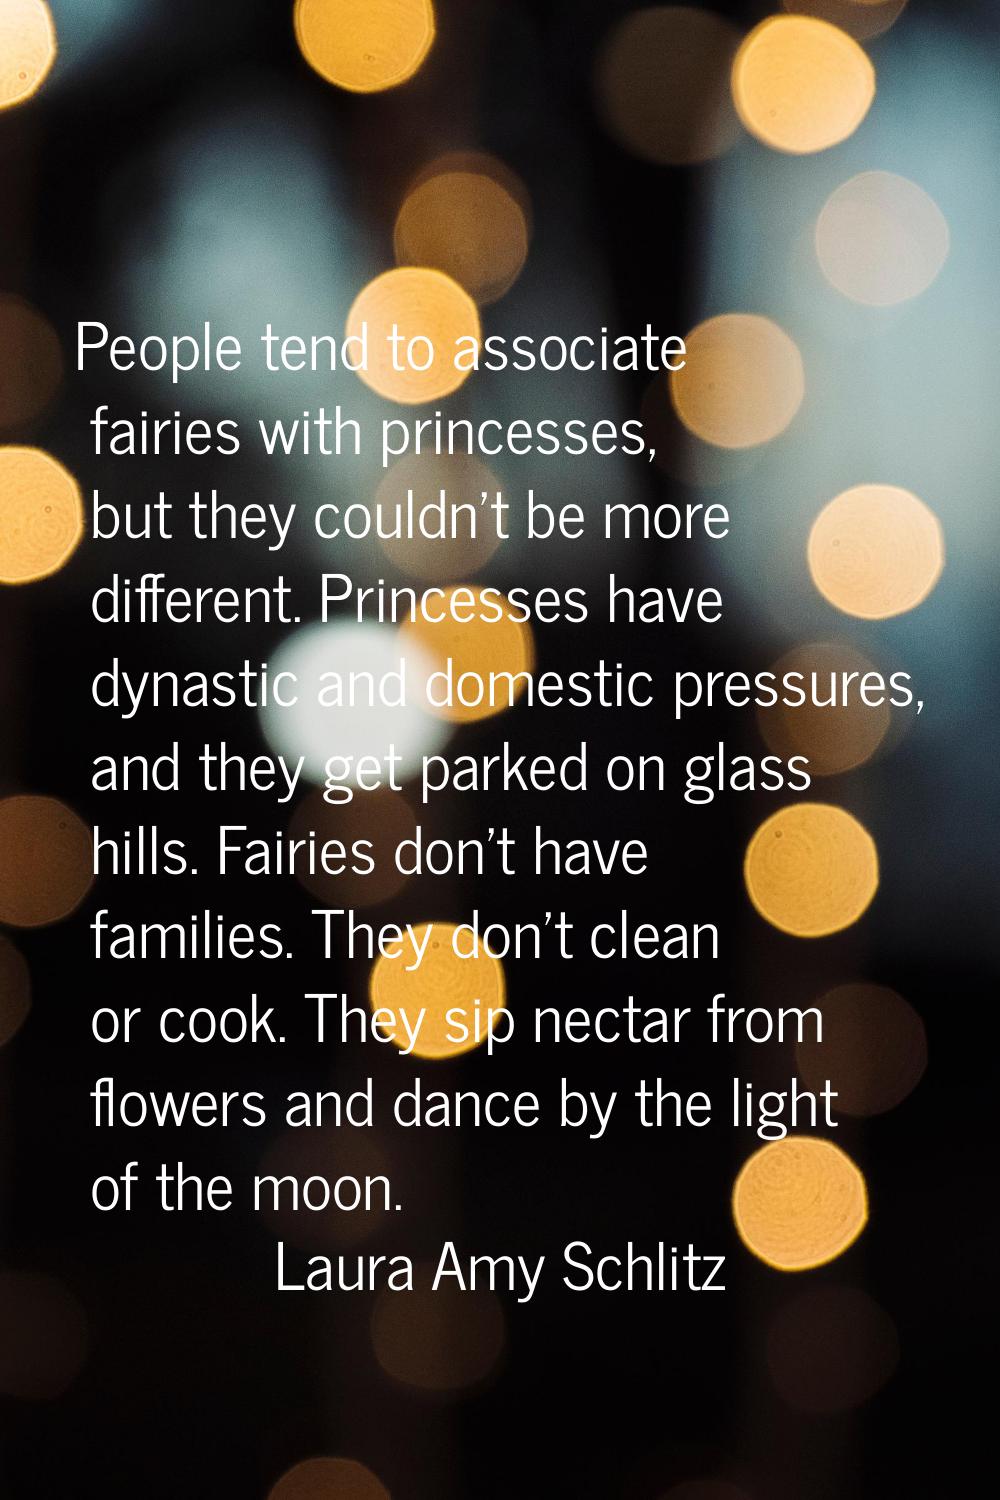 People tend to associate fairies with princesses, but they couldn't be more different. Princesses h